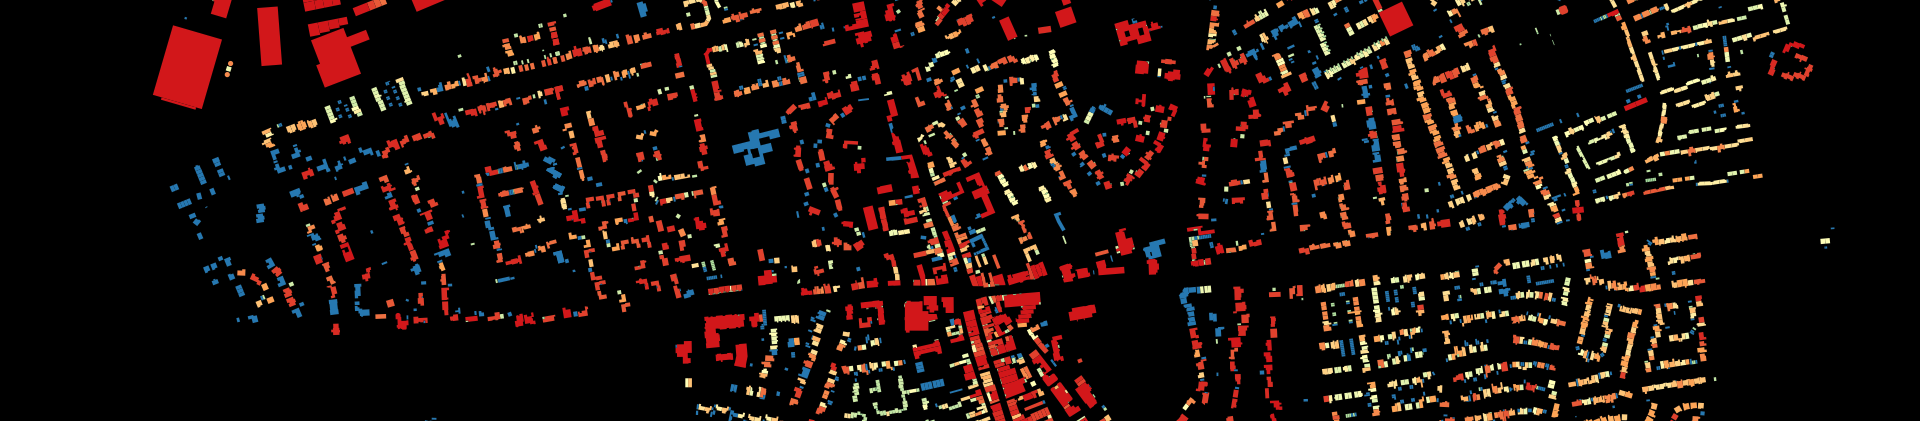 Articles 2008. The spatial analysis of urban systems